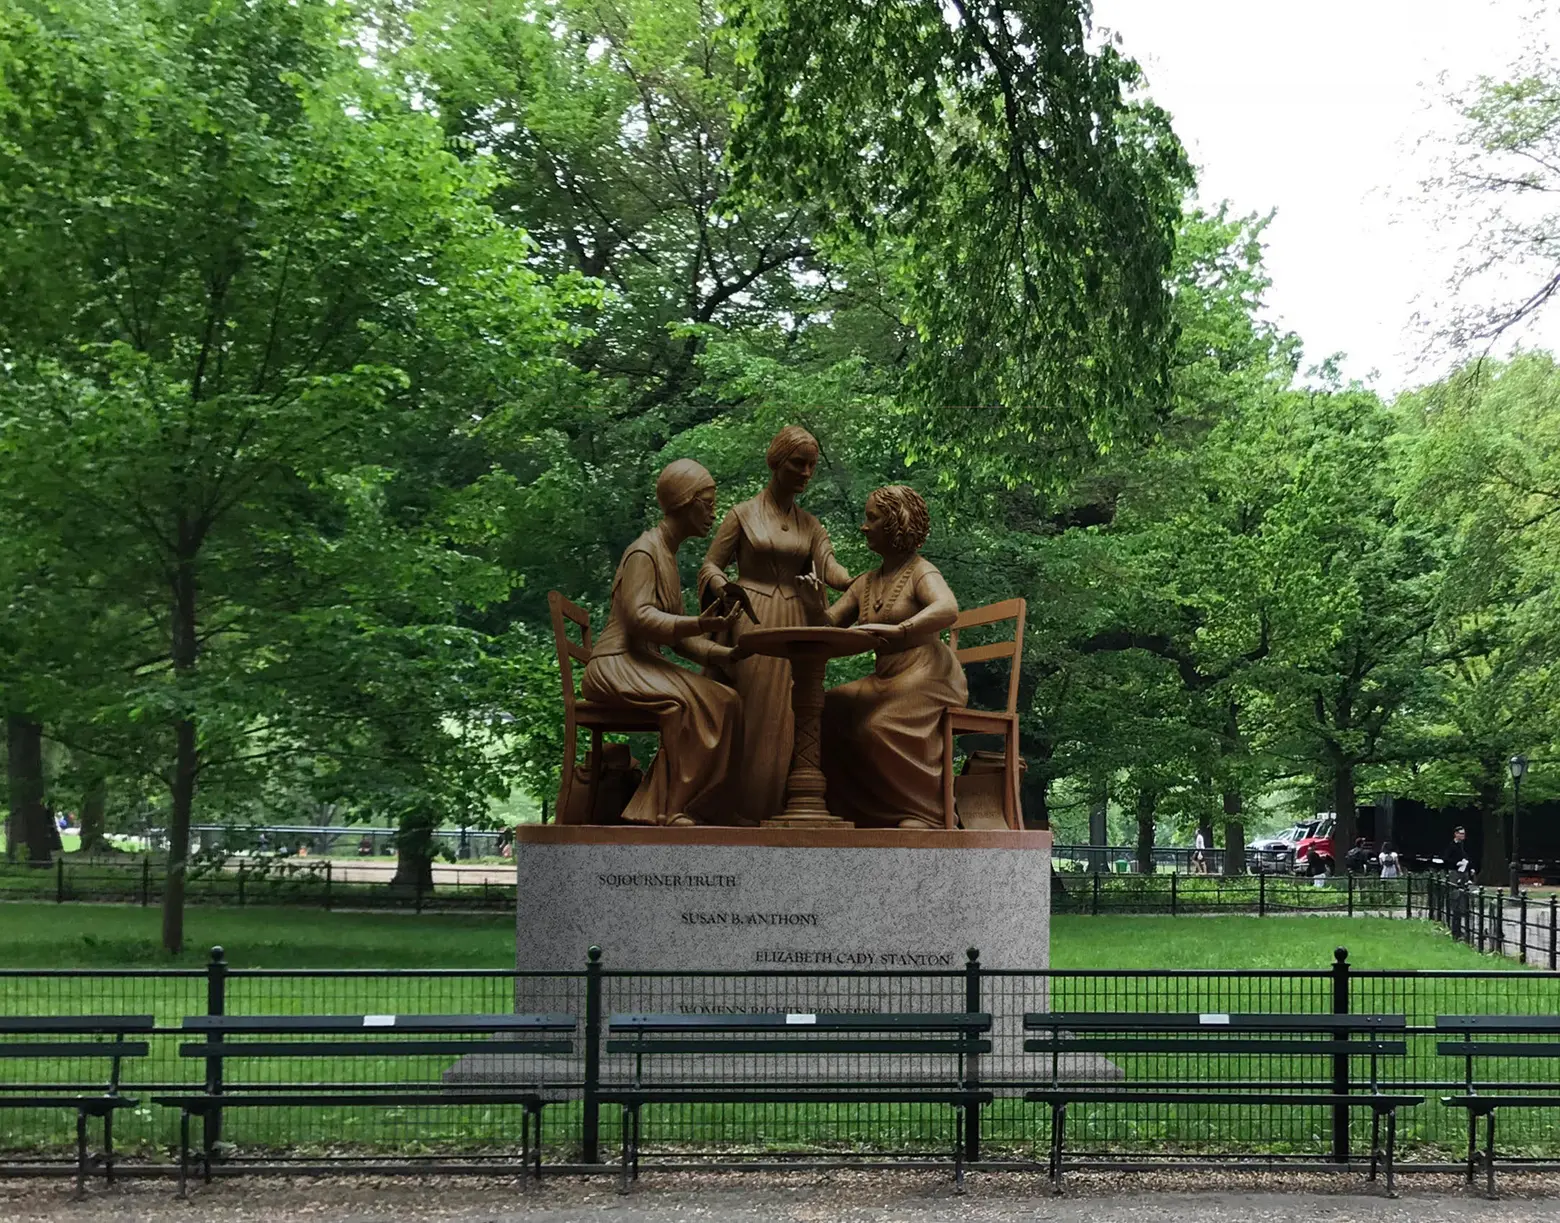 New design revealed for Central Park women’s suffrage statue, but objections delay vote